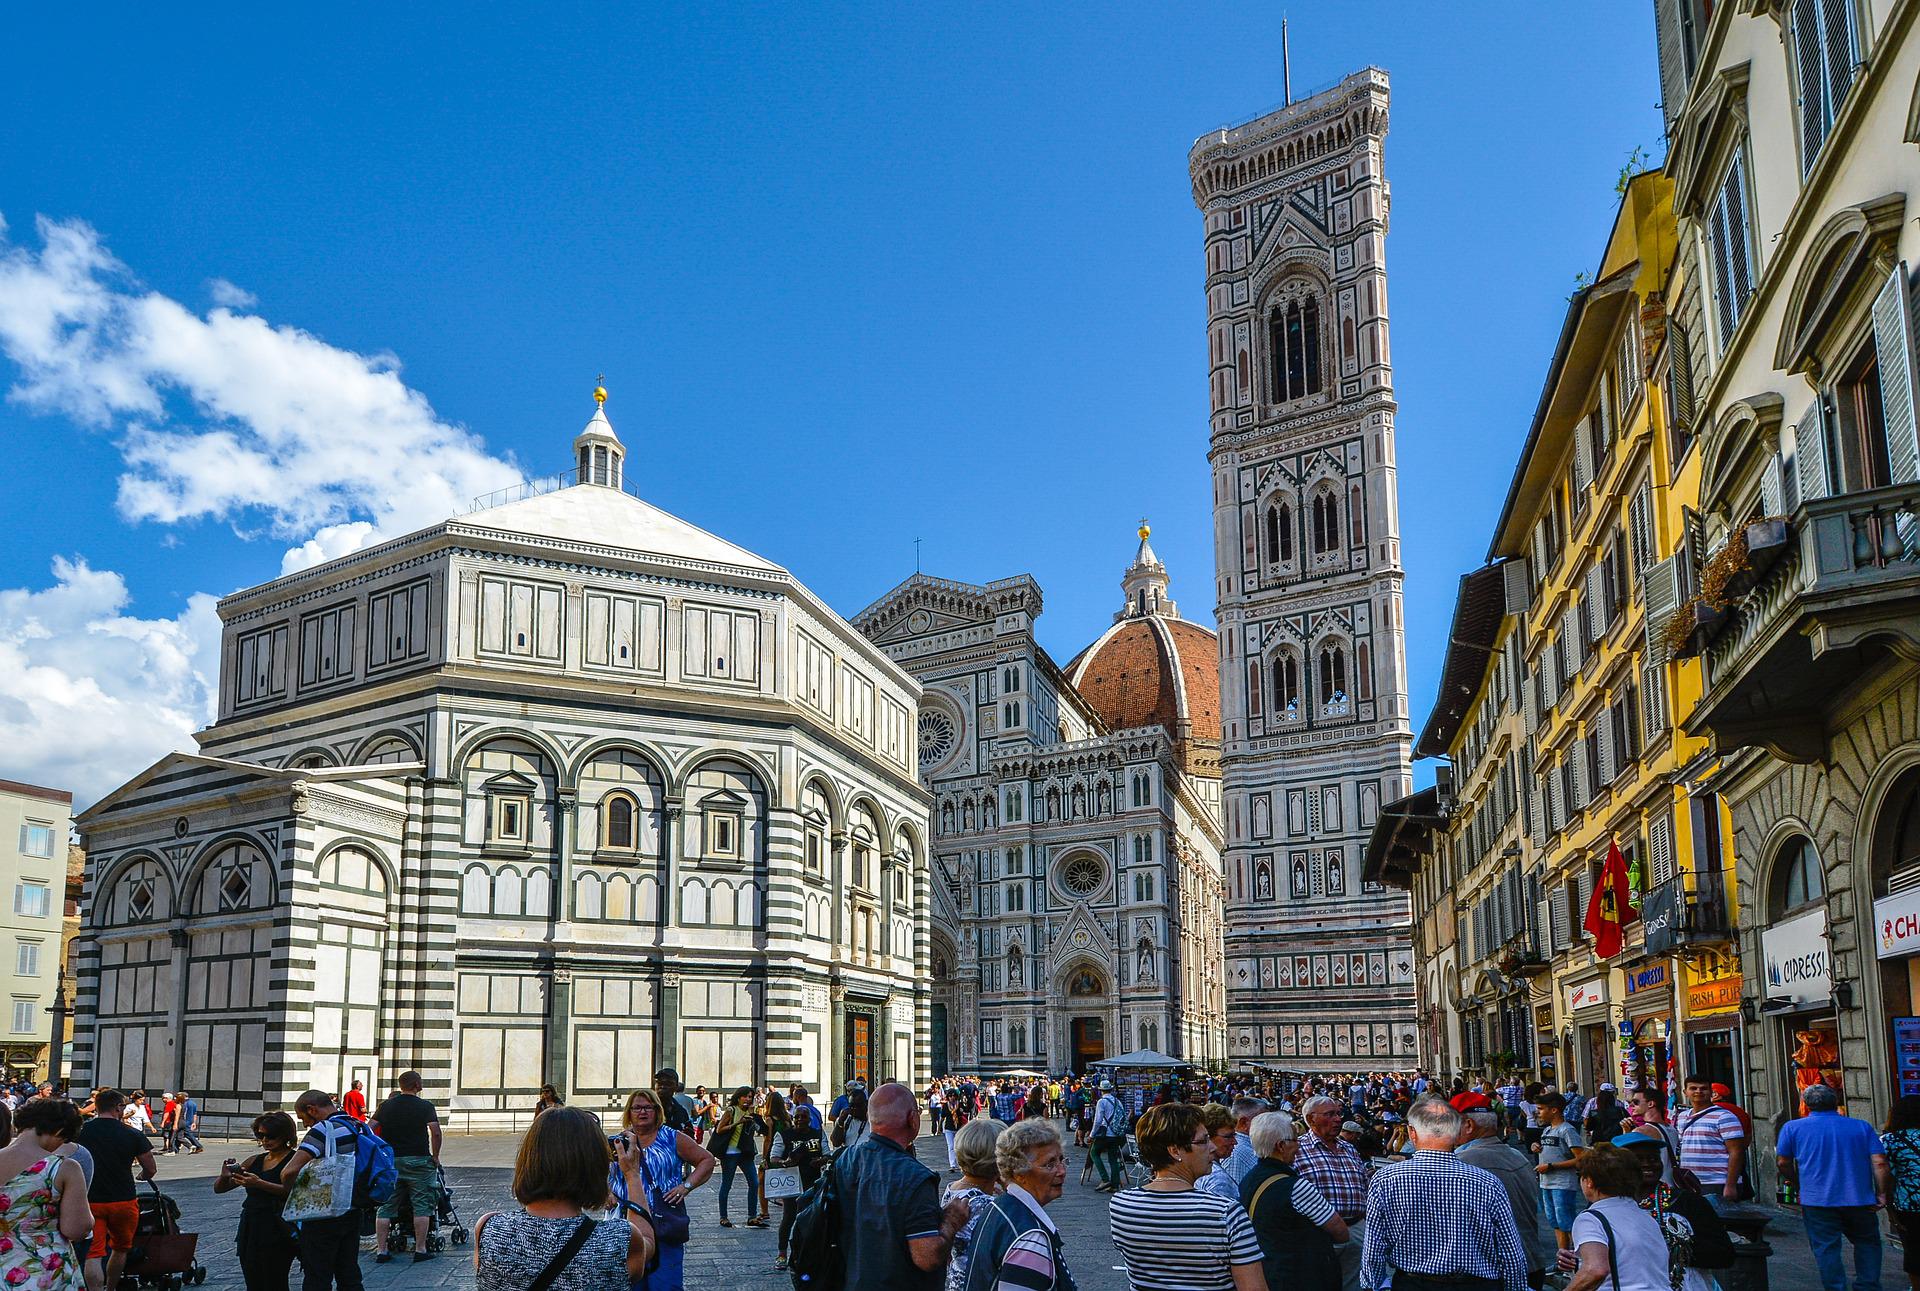 Planning an Italian vacation? Here are 18 fabulous destinations you simply have to visit...